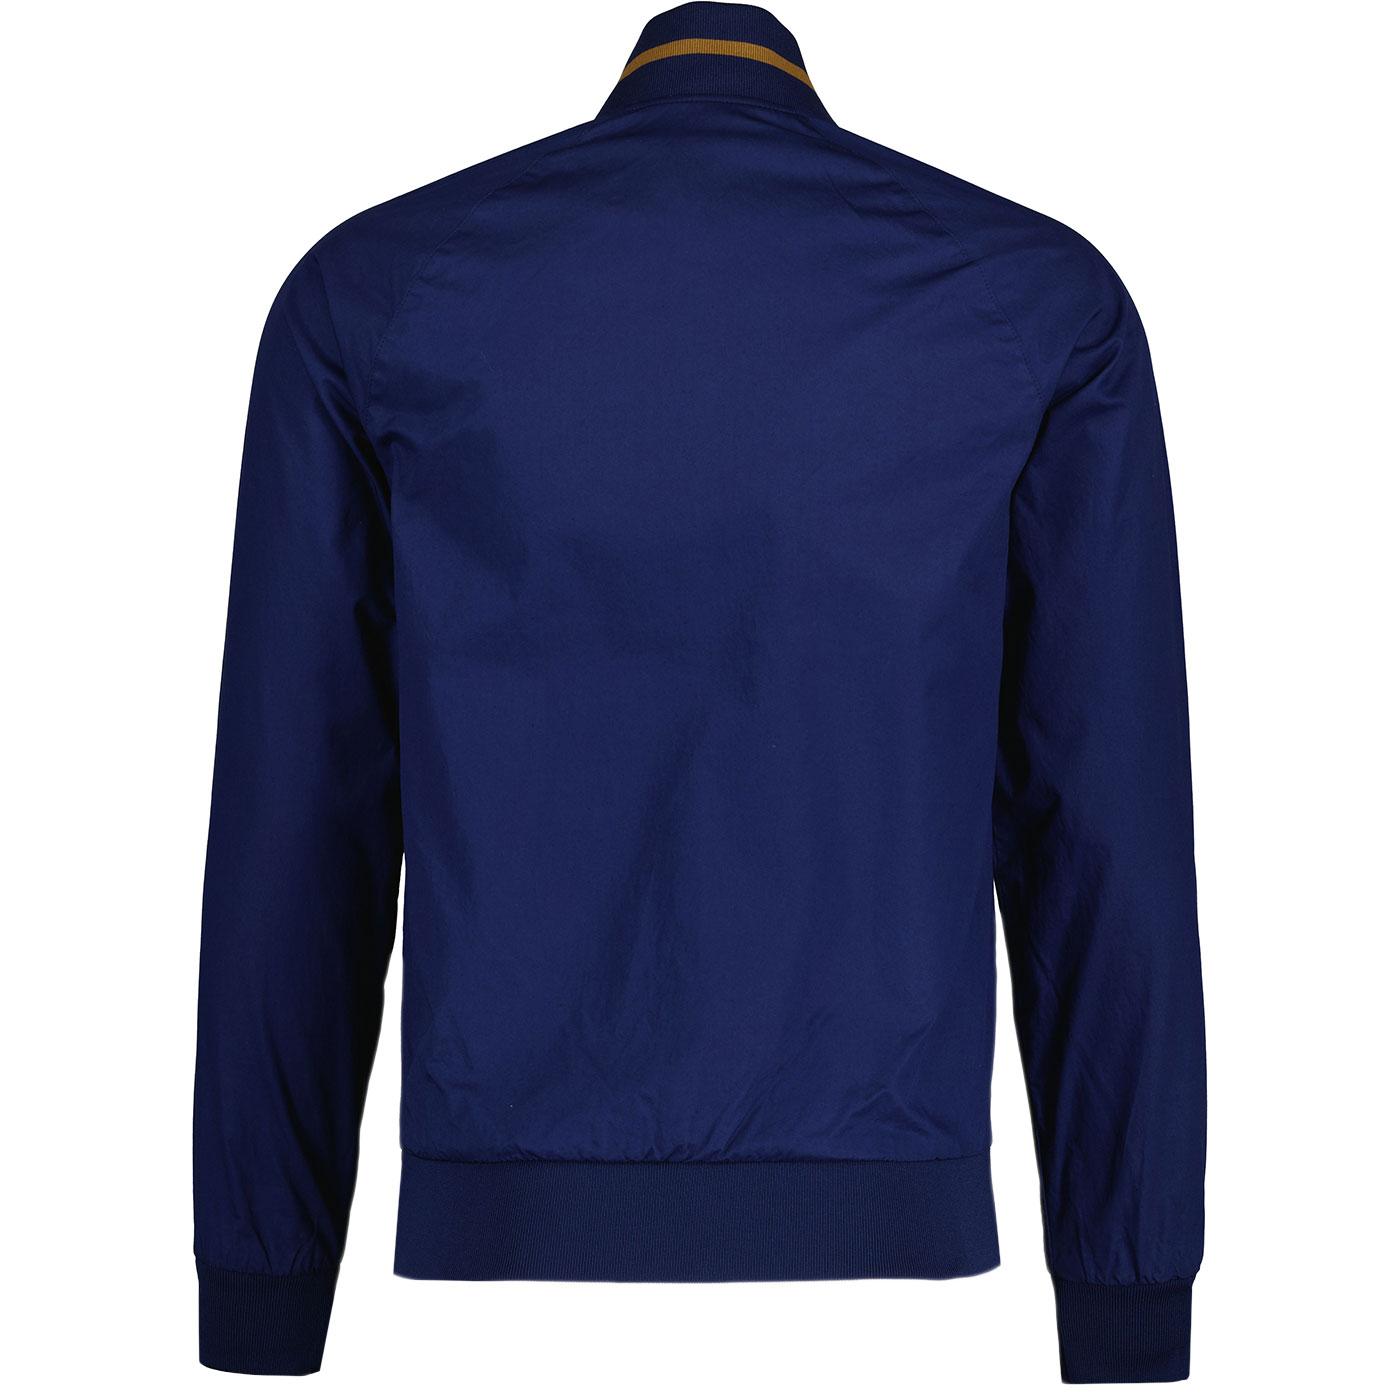 FRED PERRY retro Tennis cotton Bomber Jacket in French Navy